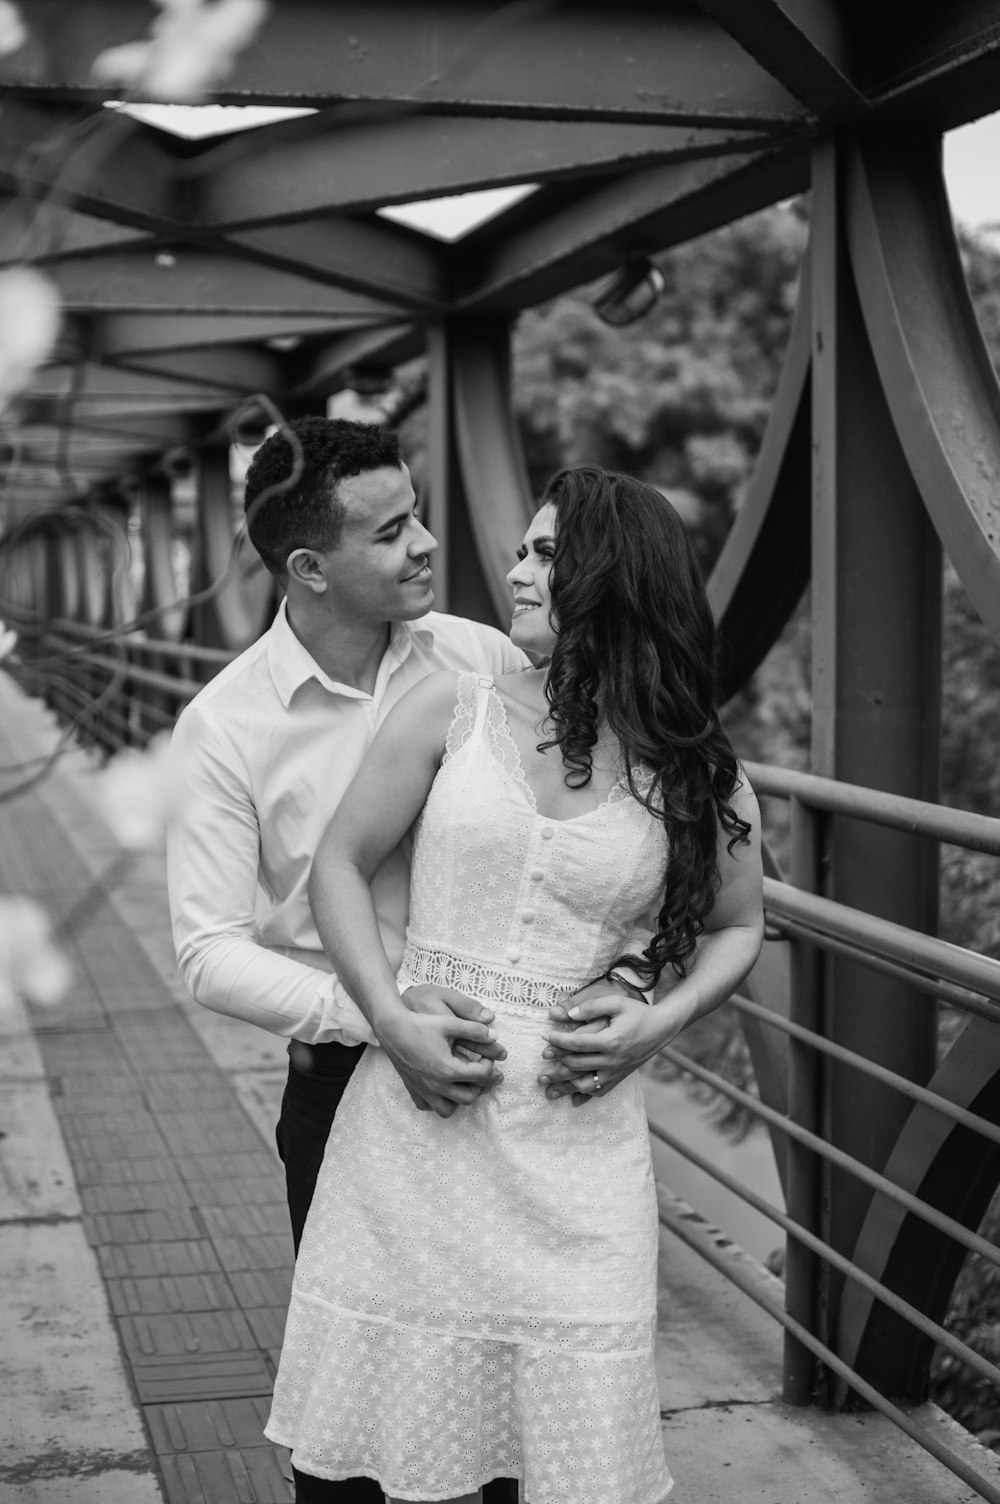 man in white dress shirt and woman in white dress standing on wooden bridge